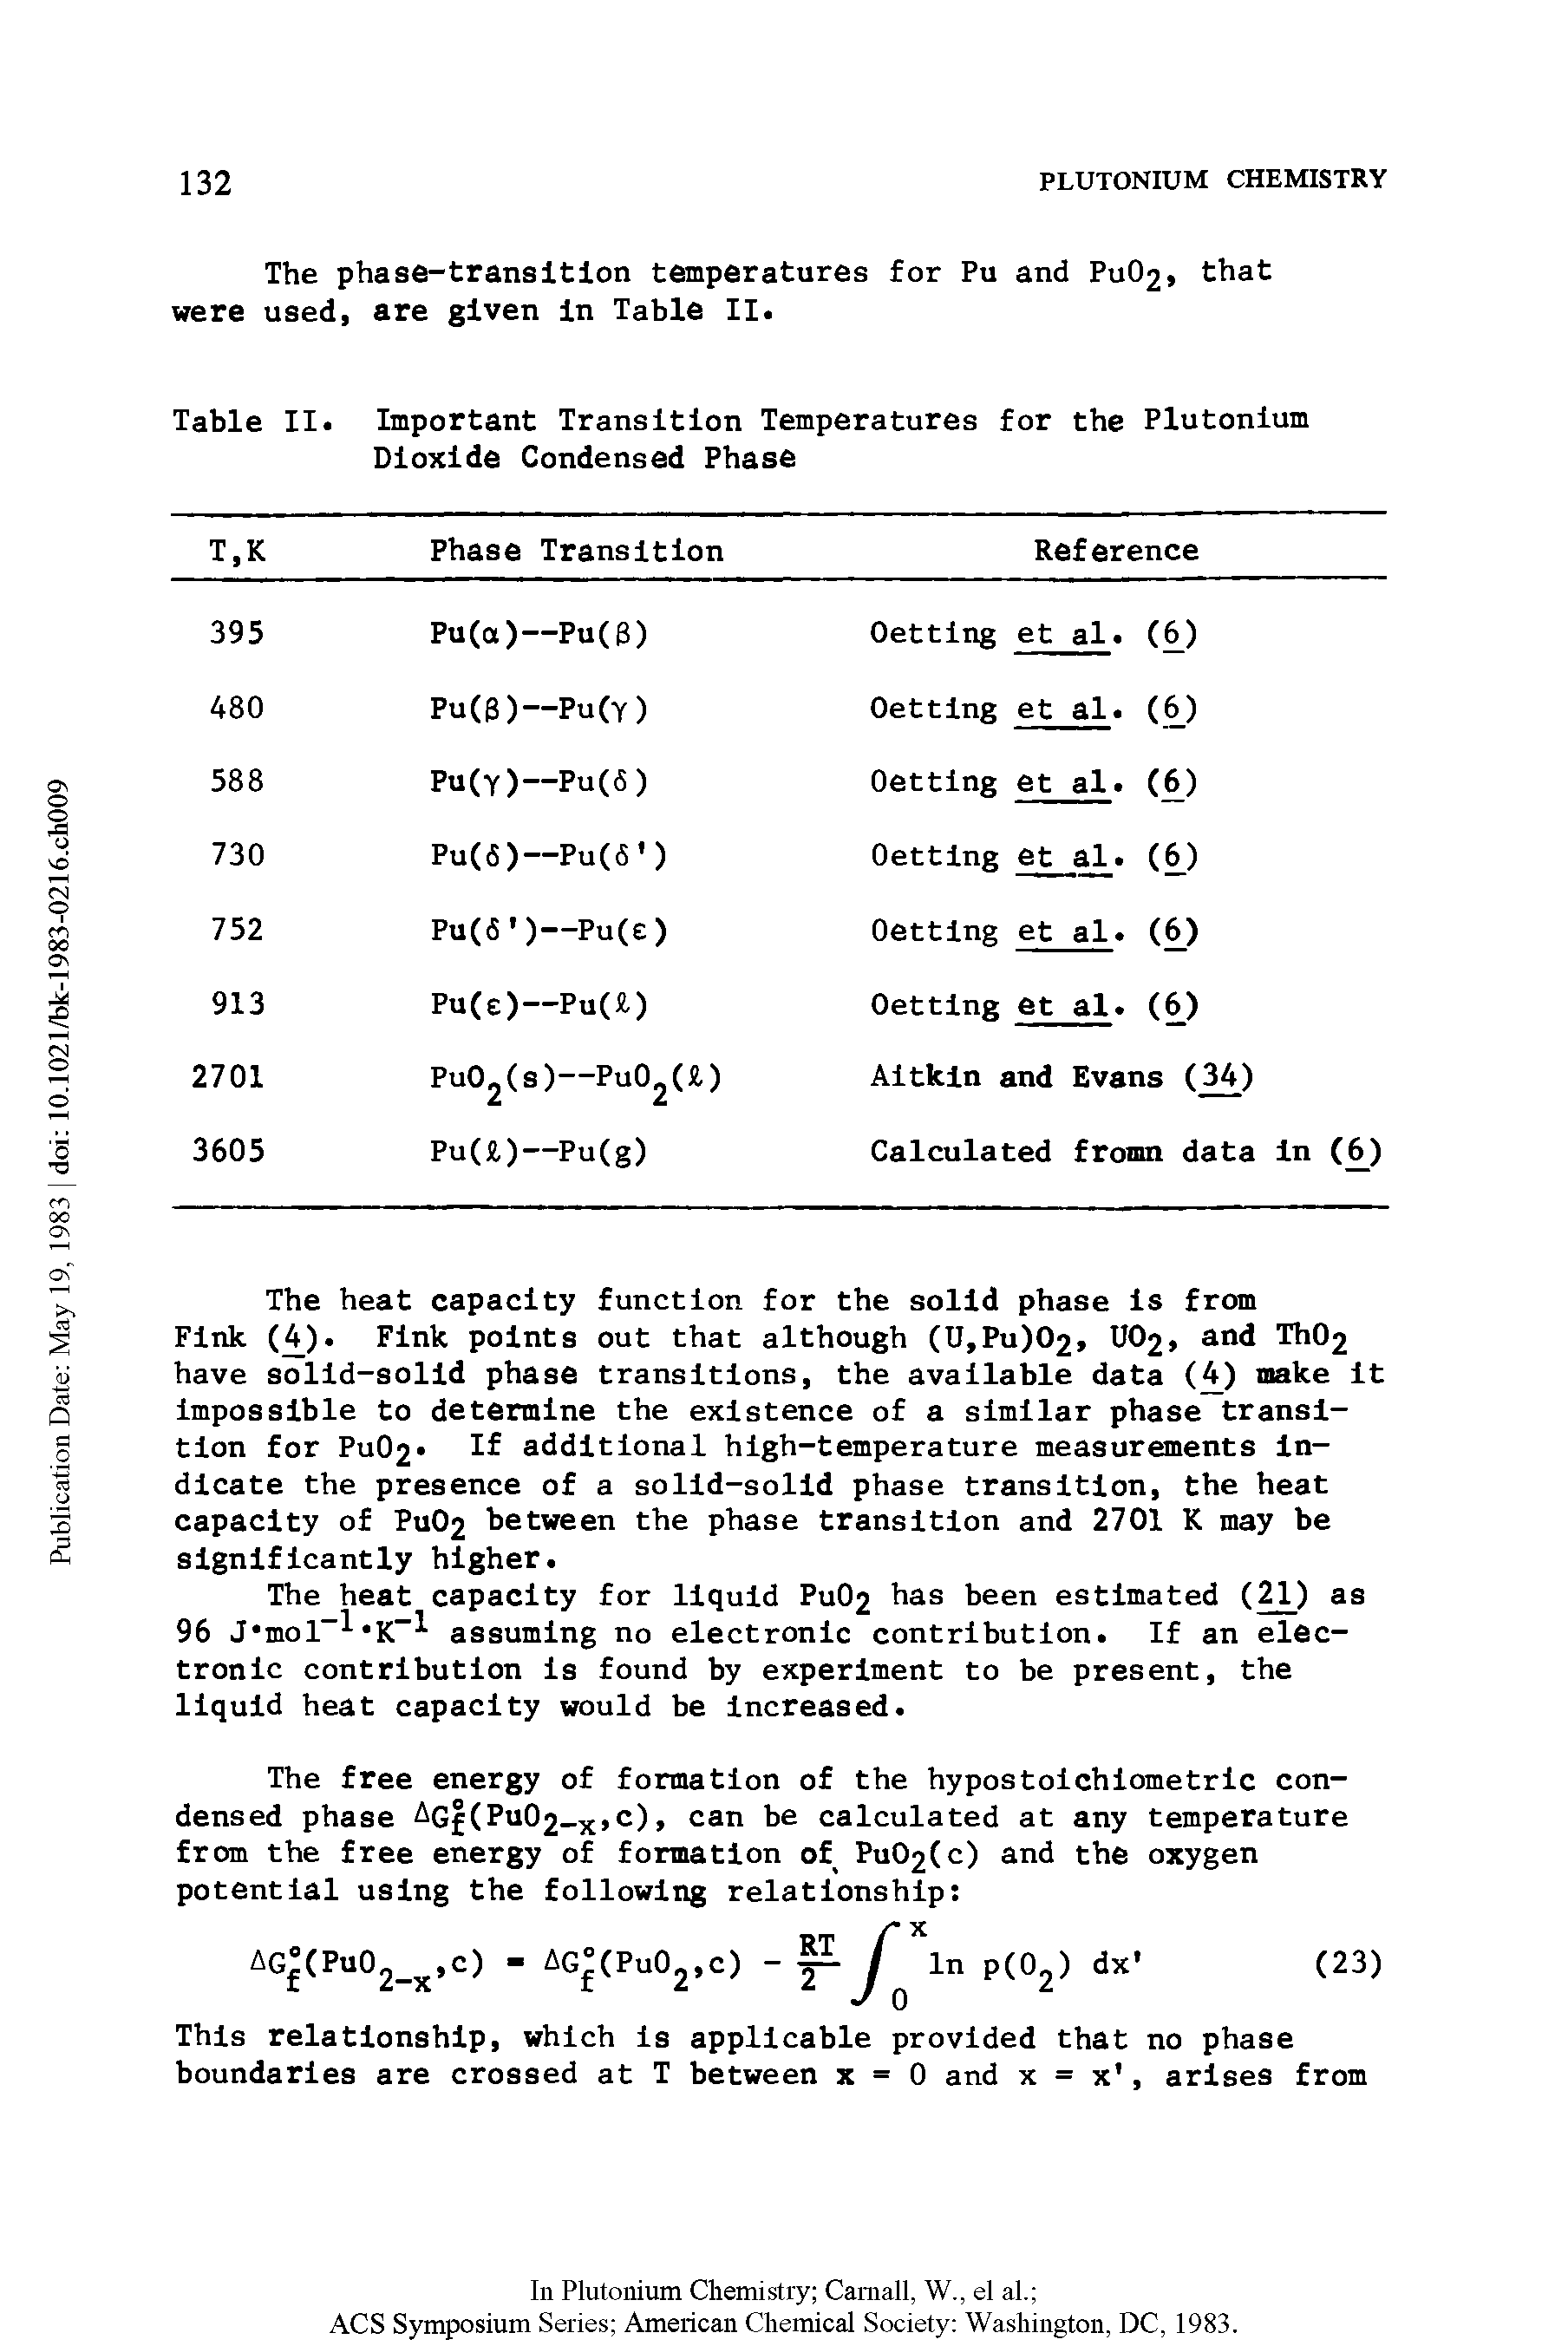 Table II. Important Transition Temperatures for the Plutonium Dioxide Condensed Phase...